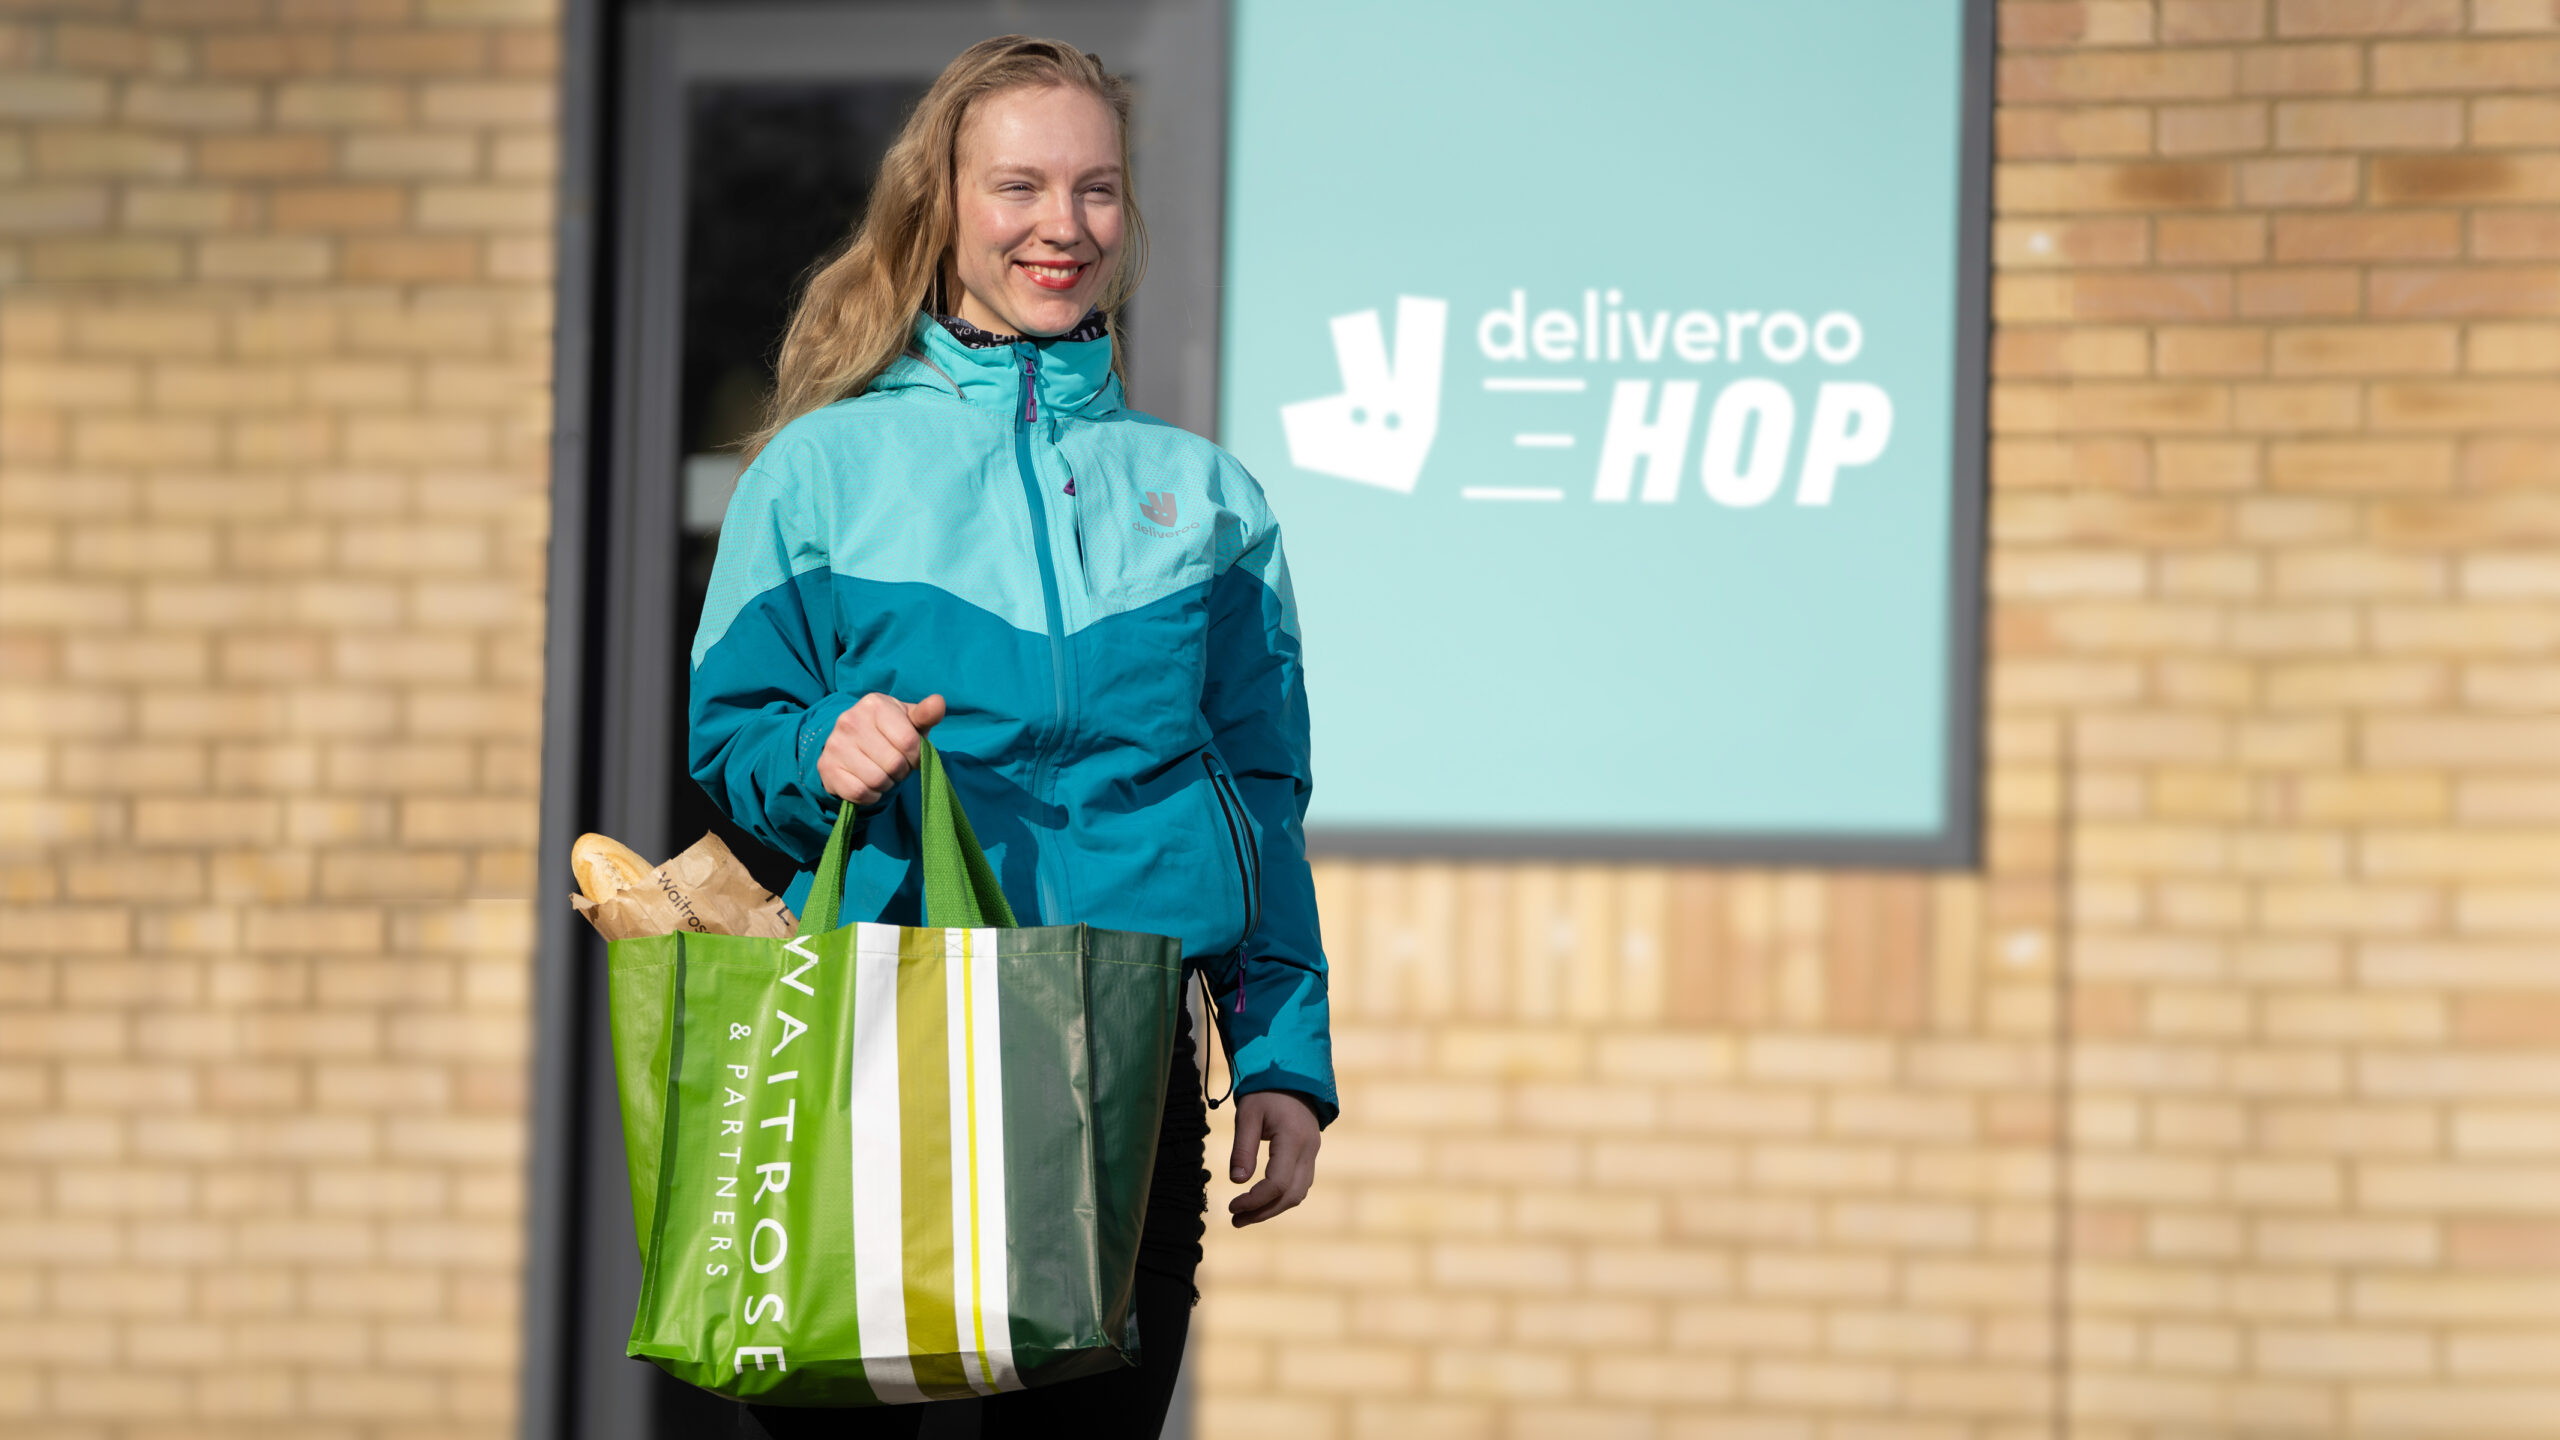 New Morrisons and Waitrose hubs added to Deliveroo Hop services in London